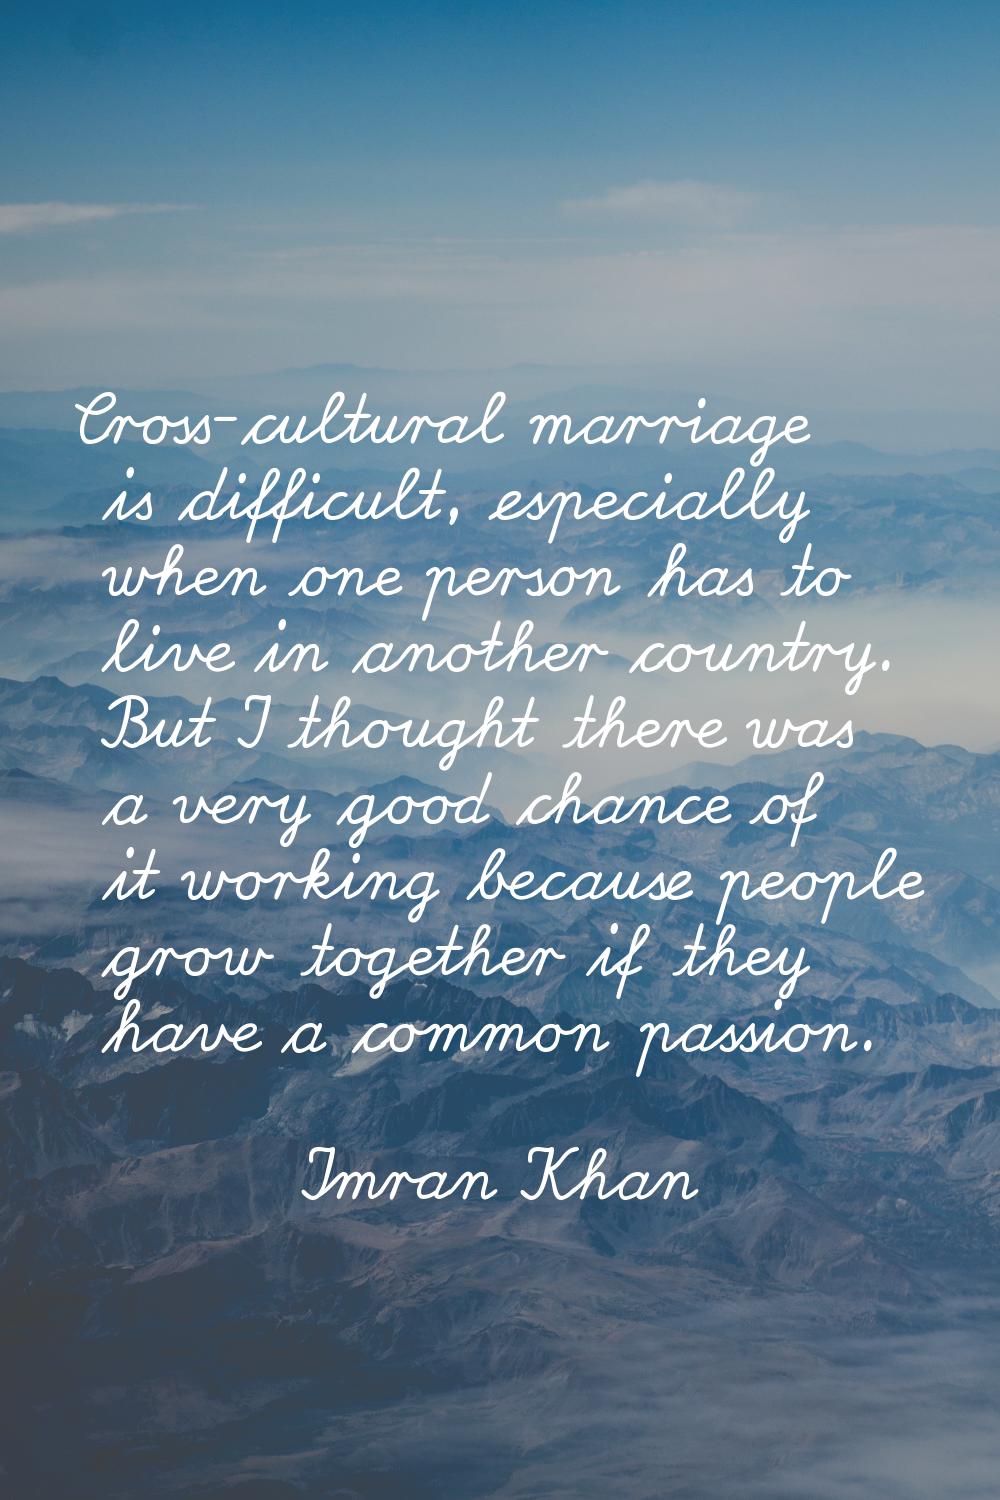 Cross-cultural marriage is difficult, especially when one person has to live in another country. Bu